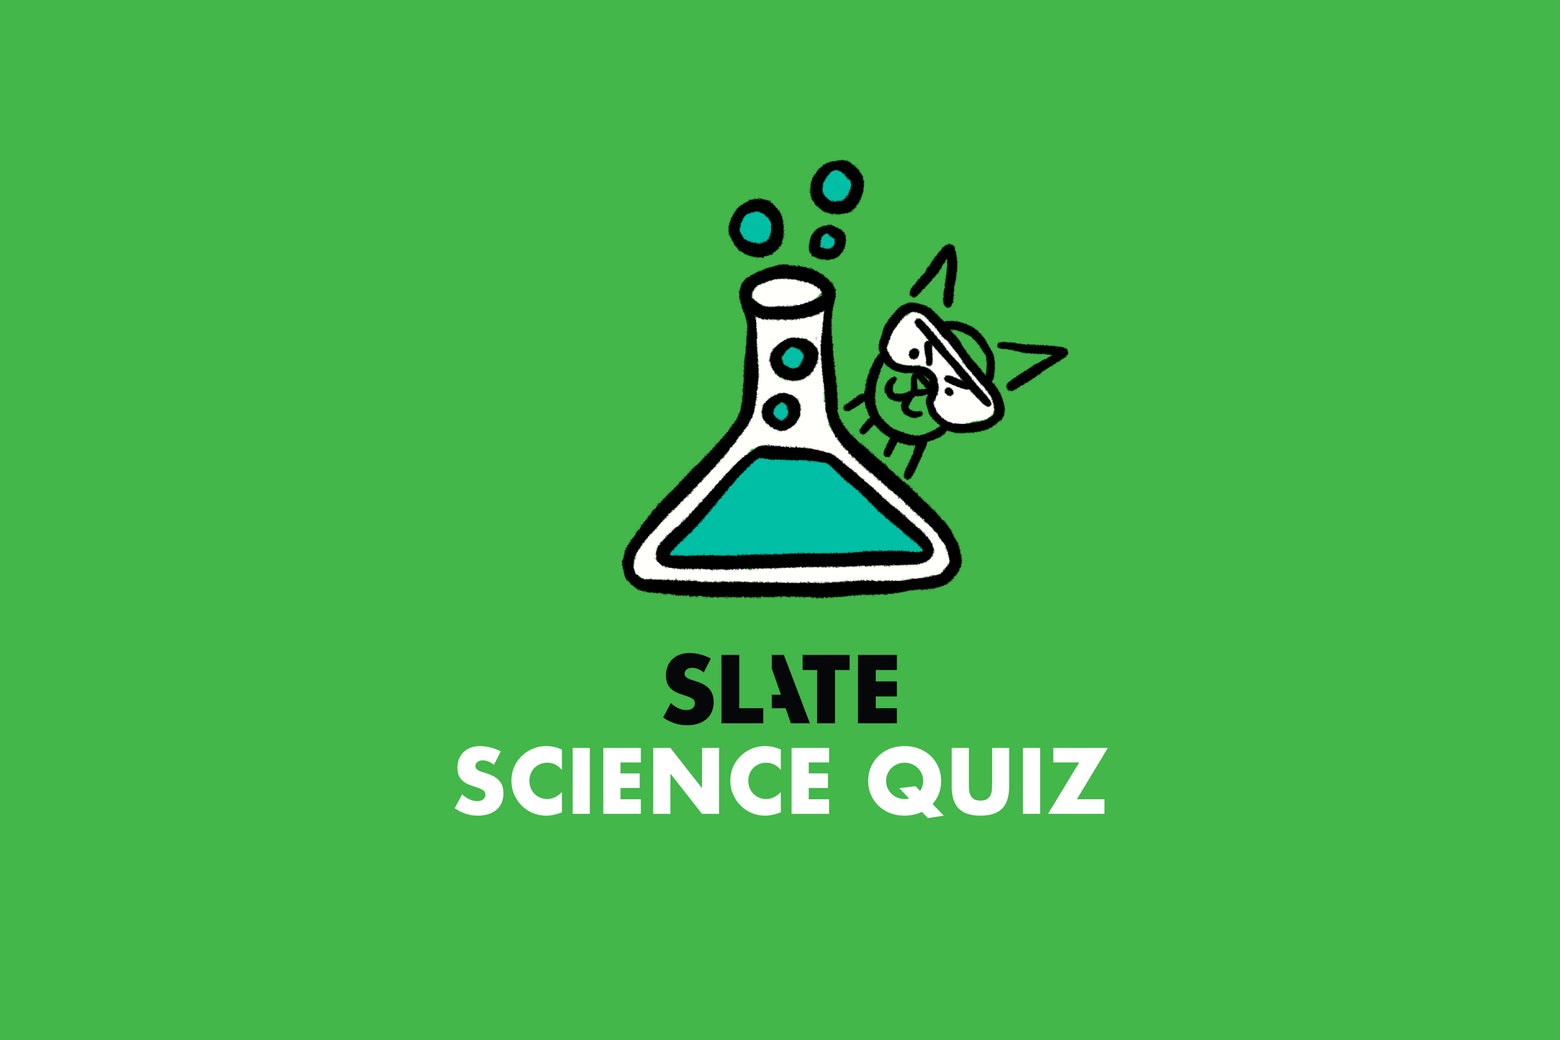 Daily Science Q&A on Slate